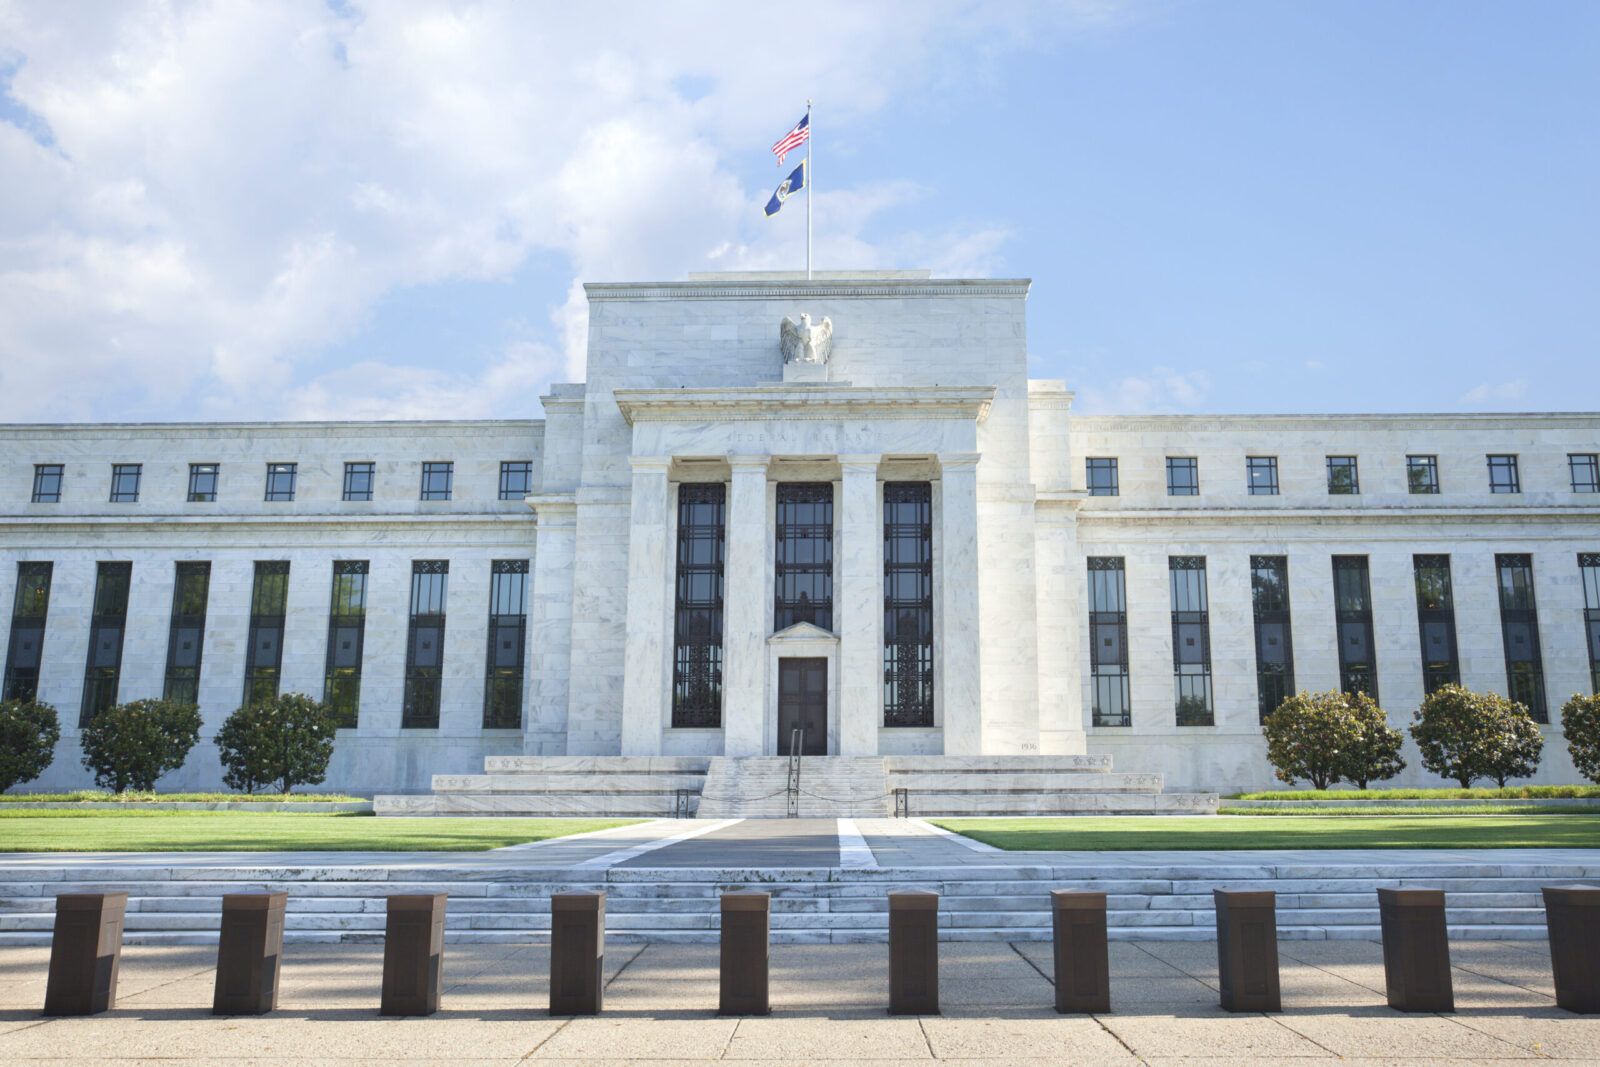 Federal Reserve building in Washington, DC